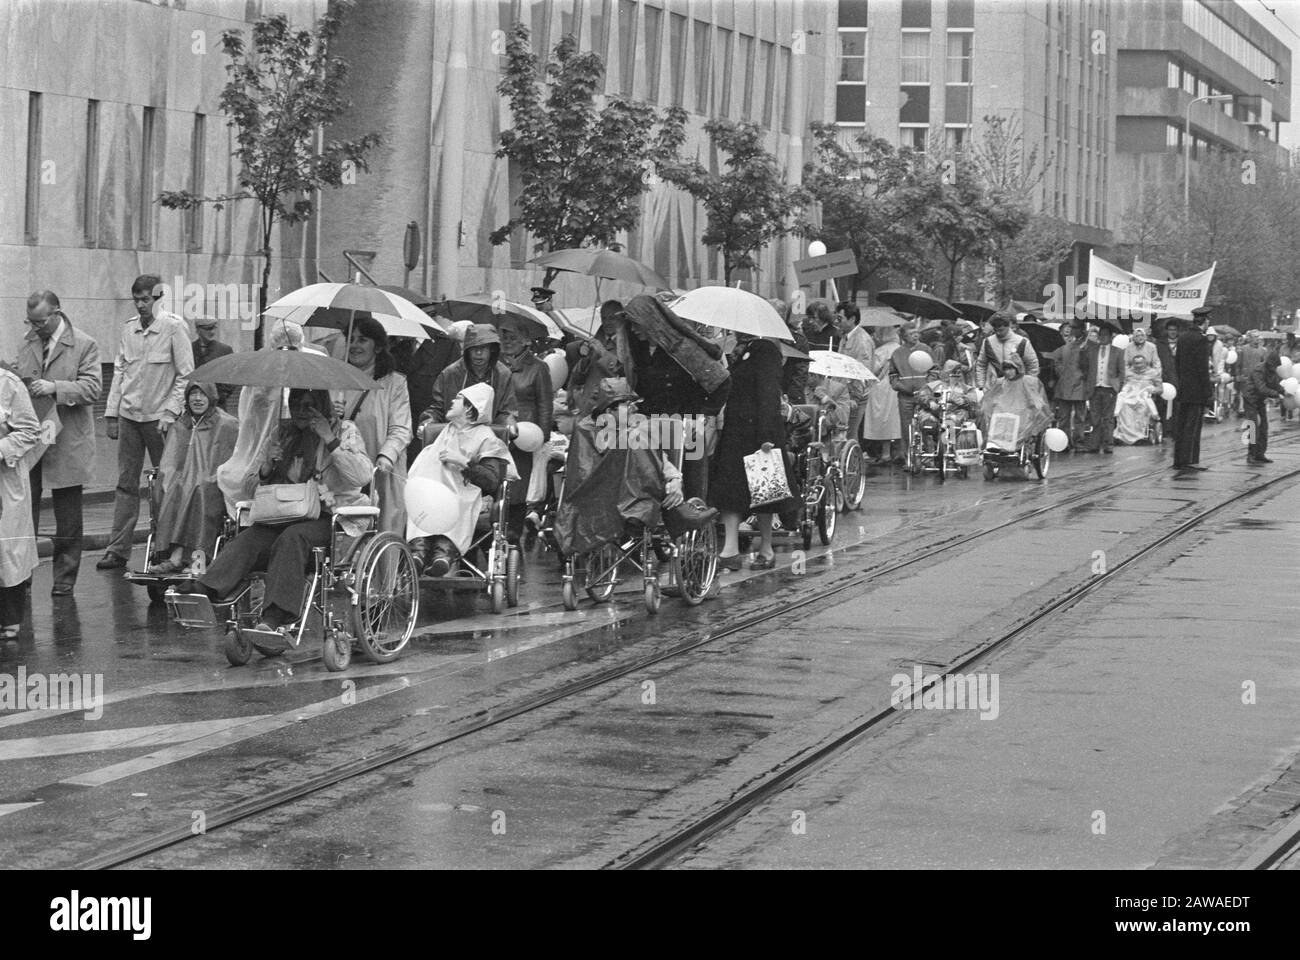 Protest disabled and incapacitated at the deterioration of the social security system in The Hague  People in a wheelchair through the city, with umbrellas against the rain date: May 28, 1983 Location: The Hague, South Holland Keywords: disability, cuts, disabled, parades, social policy Stock Photo